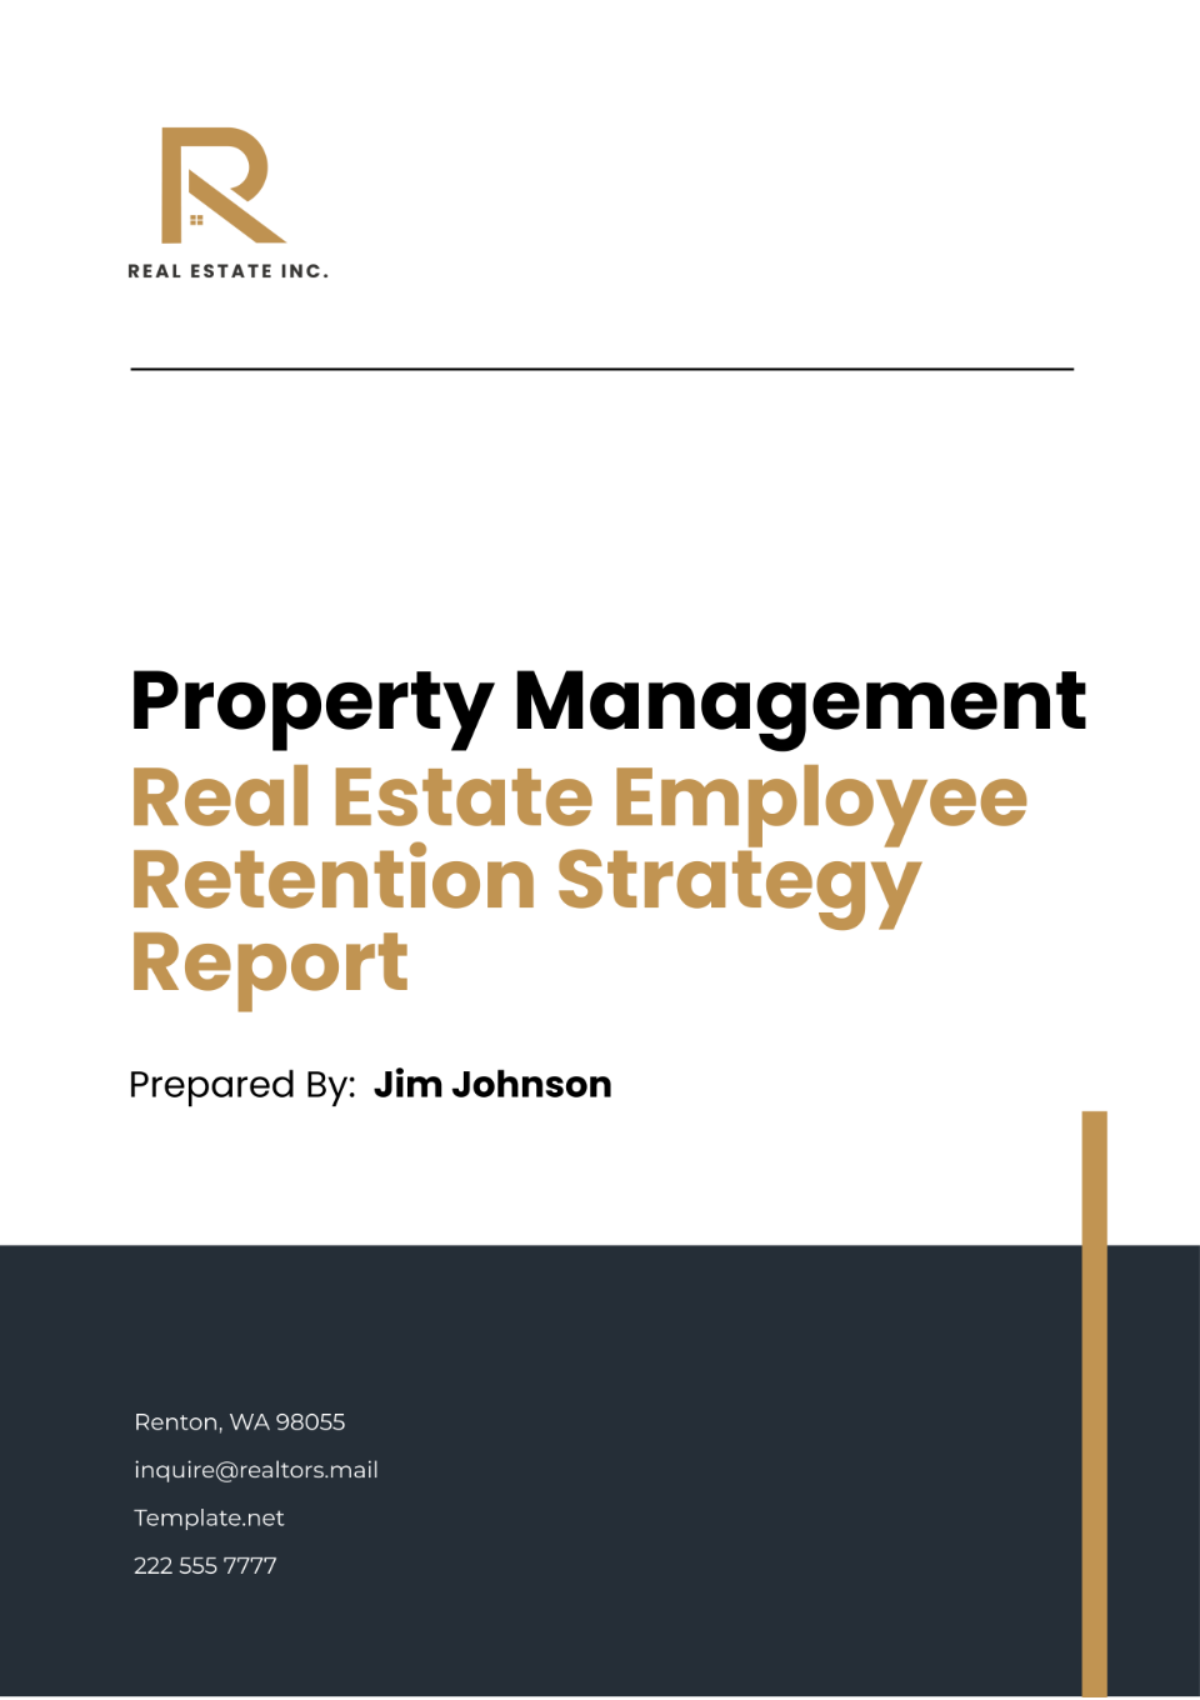 Real Estate Employee Retention Strategy Report Template